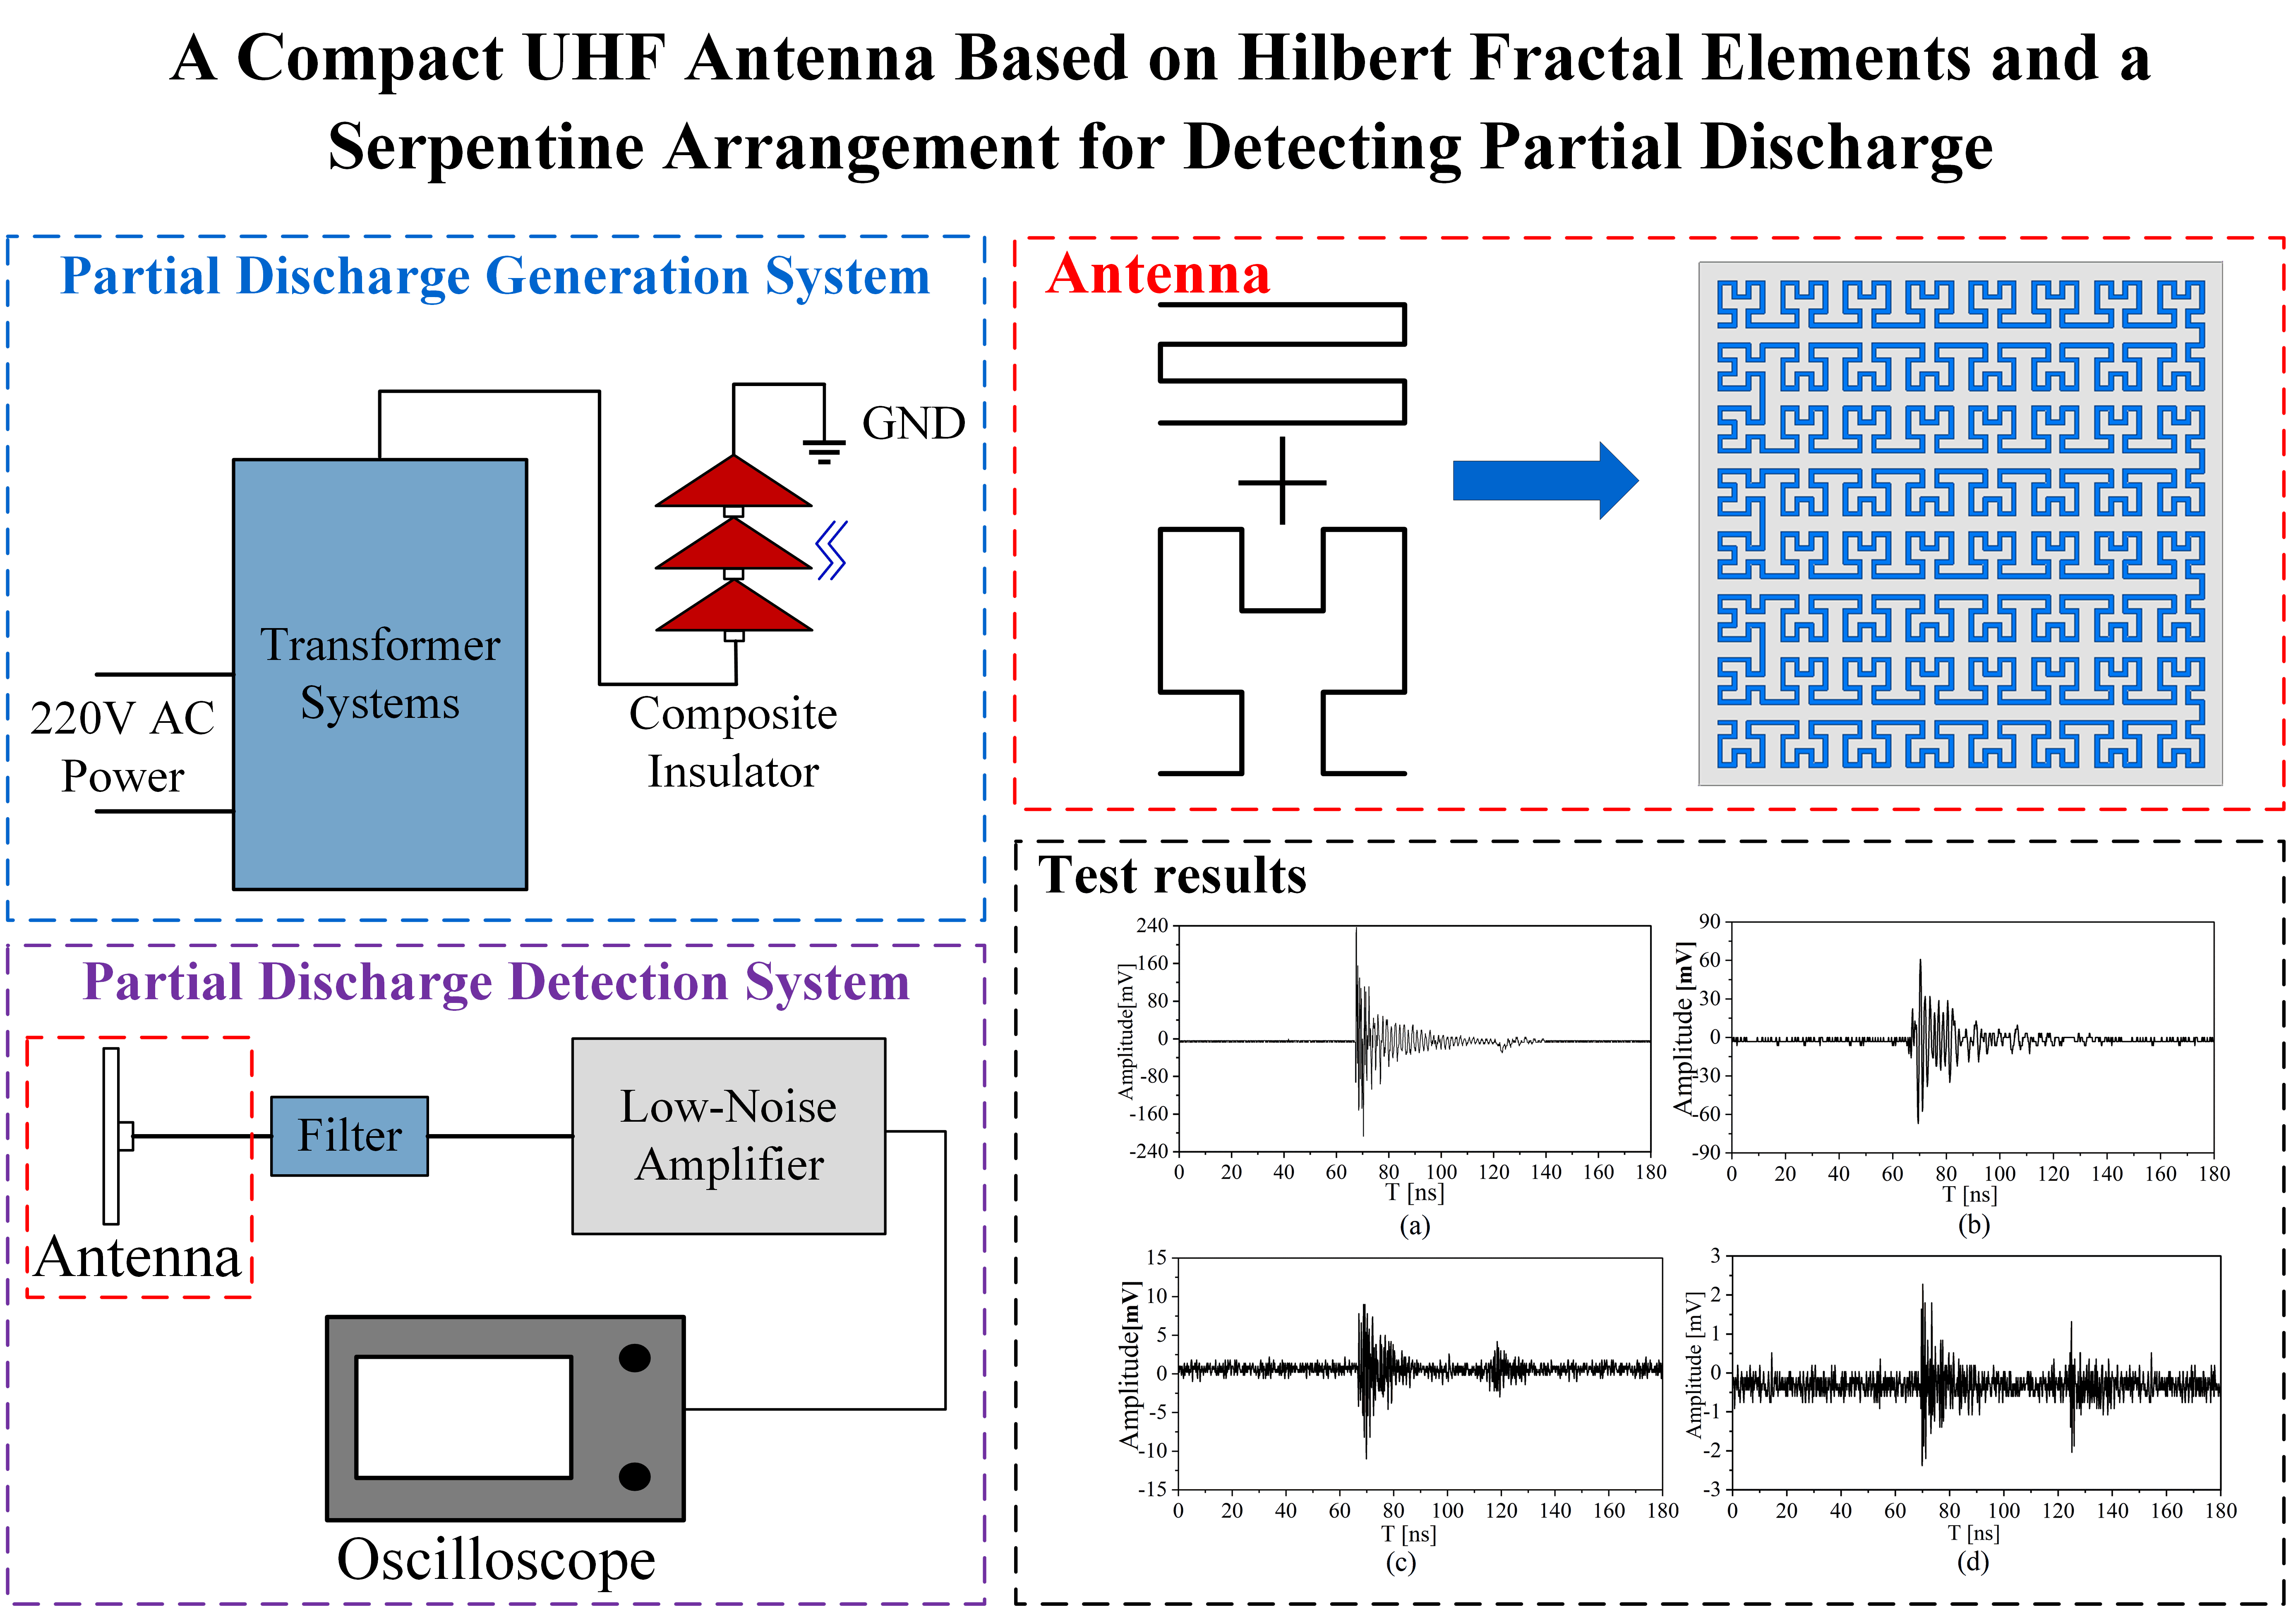 A Compact UHF Antenna Based on Hilbert Fractal Elements and a Serpentine Arrangement for Detecting Partial Discharge